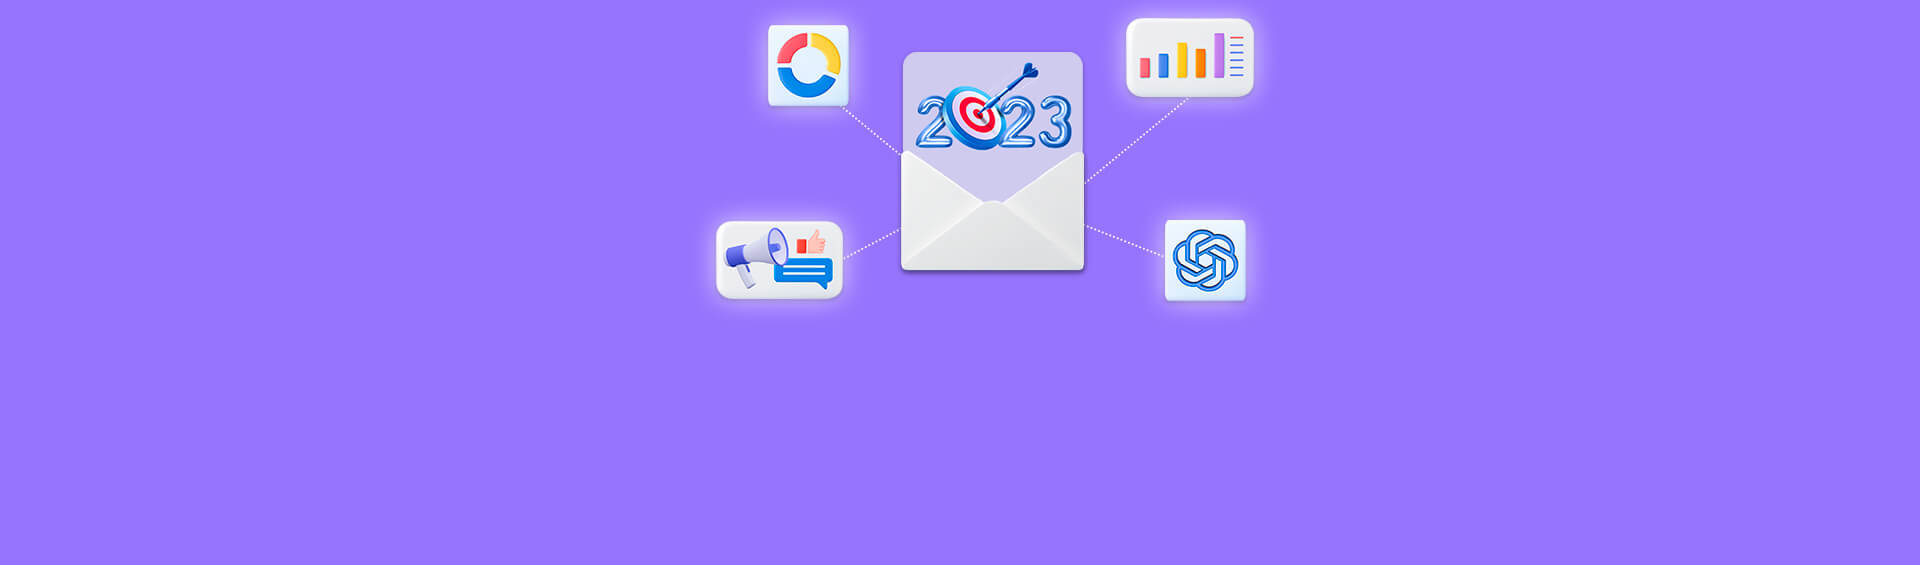 Try This in 2023: Ultimate Email Marketing Trends List